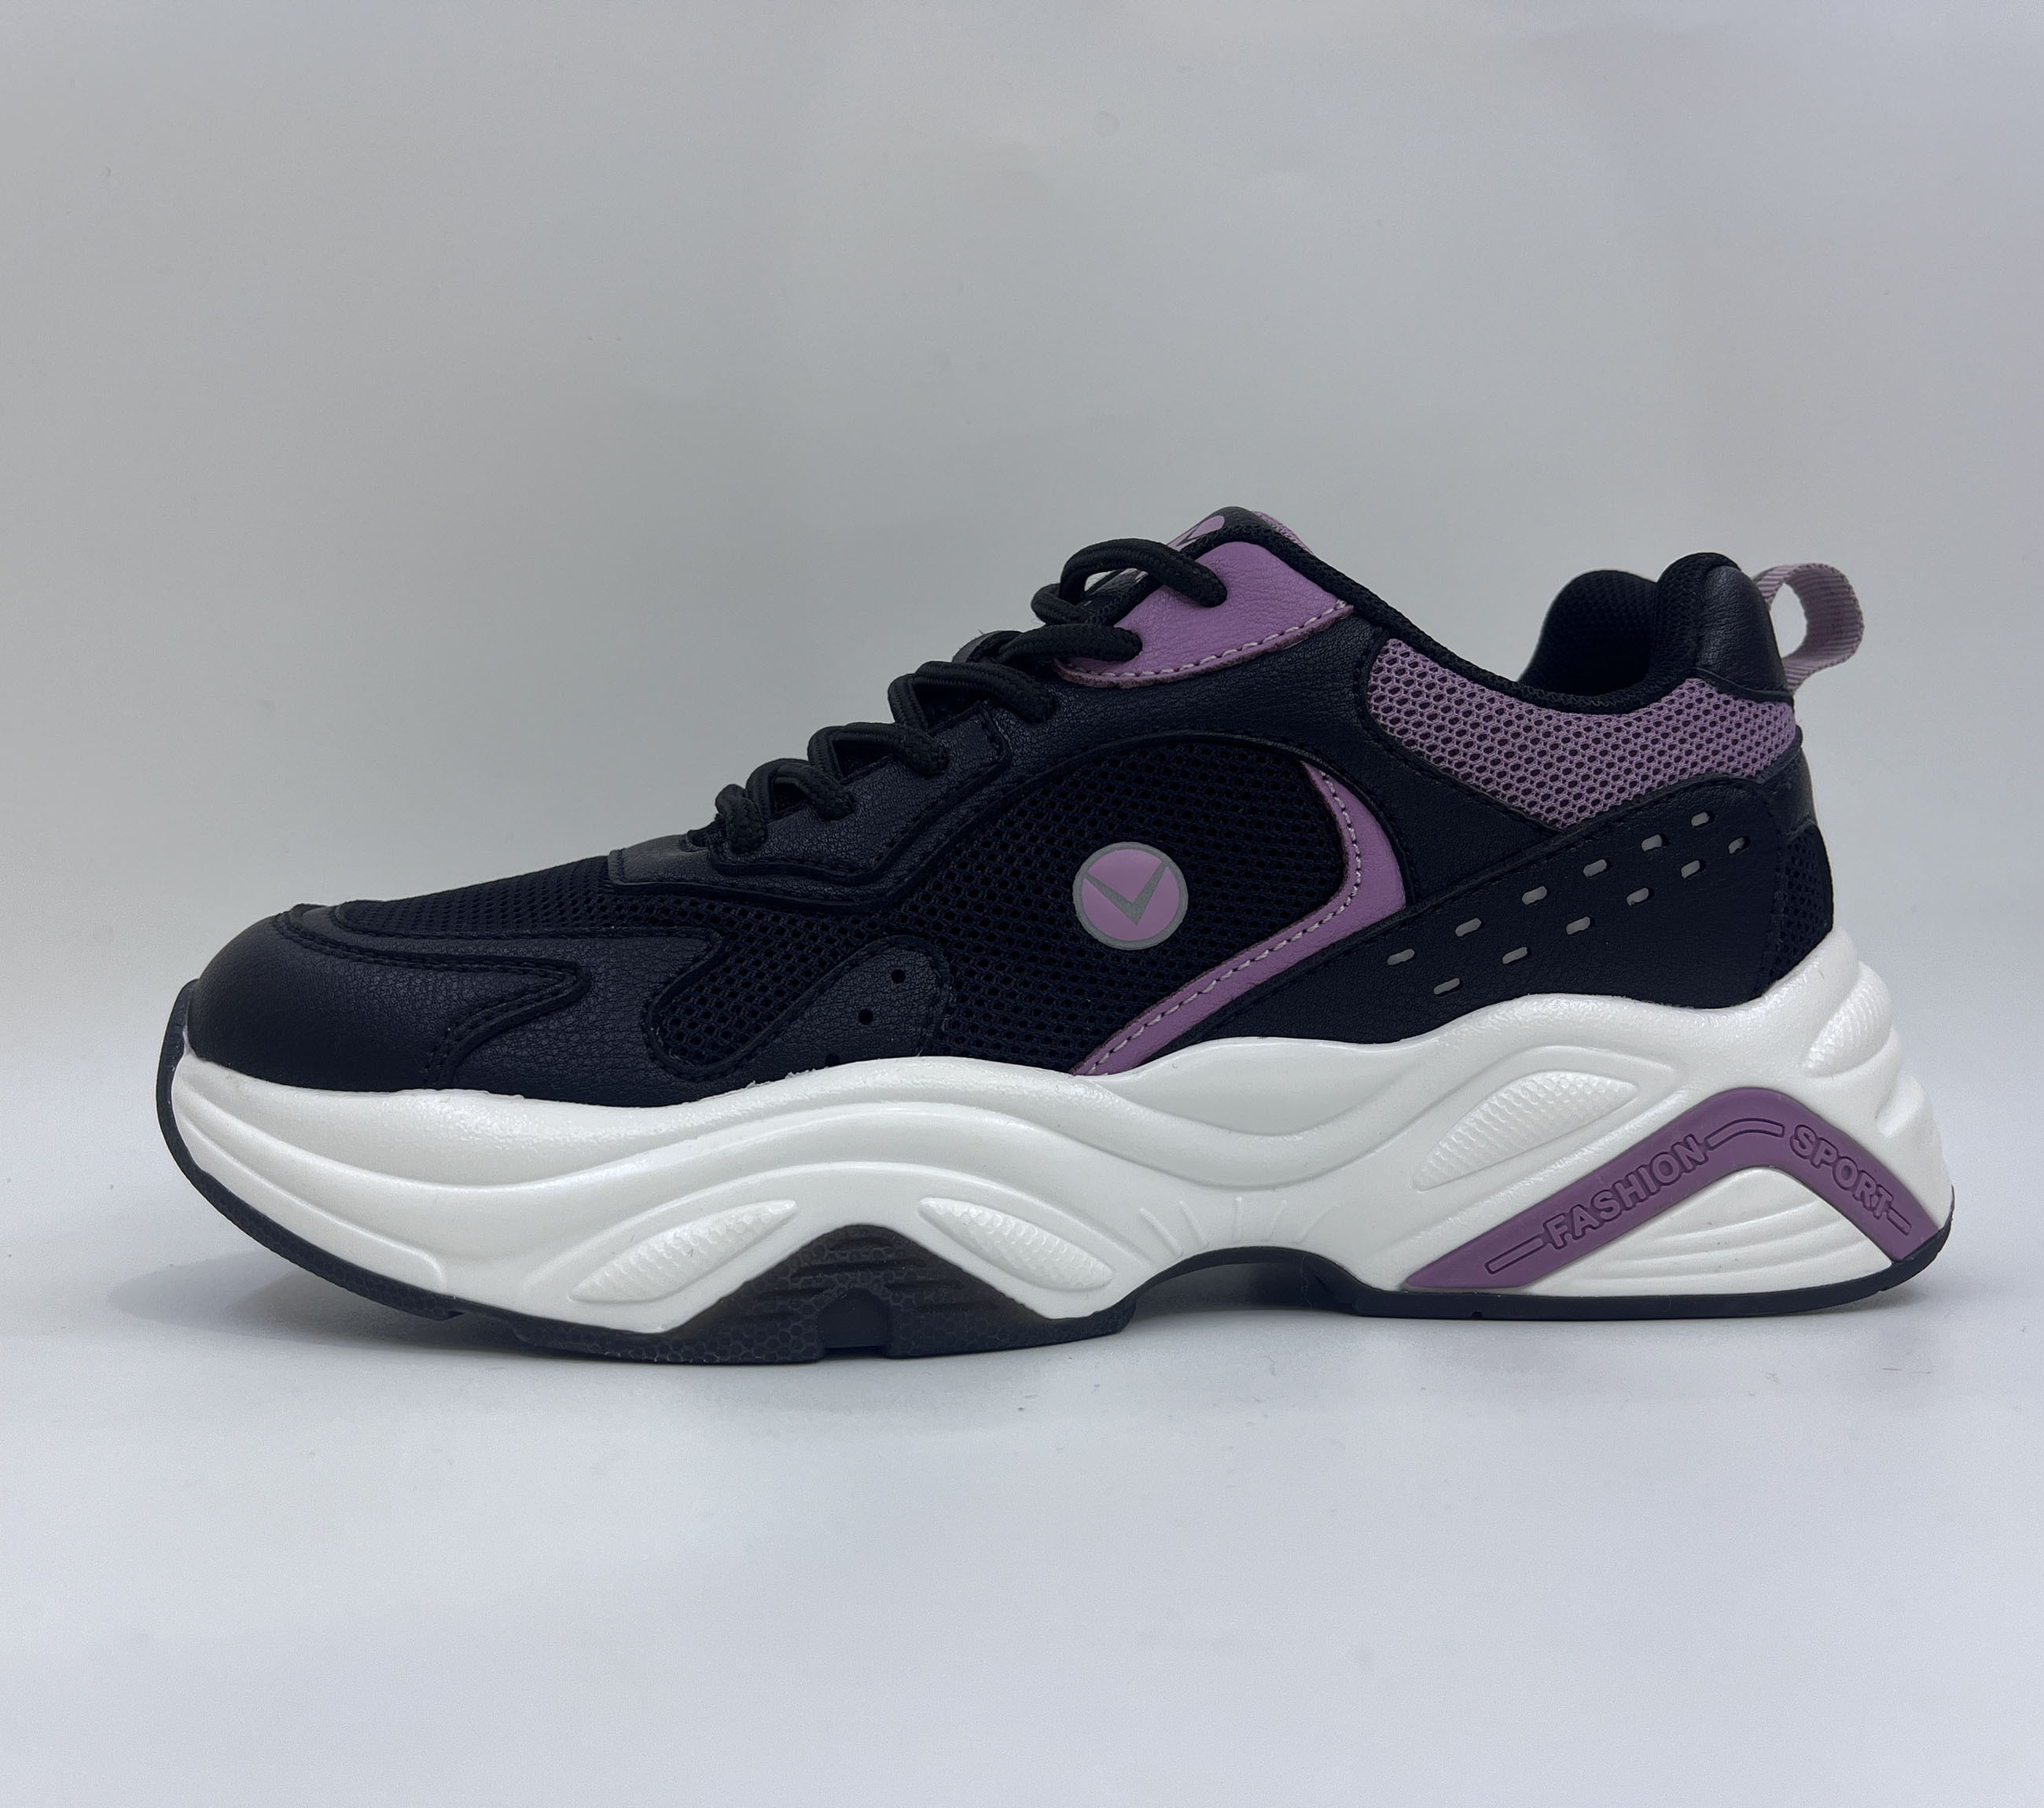 Cheap breathable mesh upper material soft elastic band sport shoes from China manufacturer